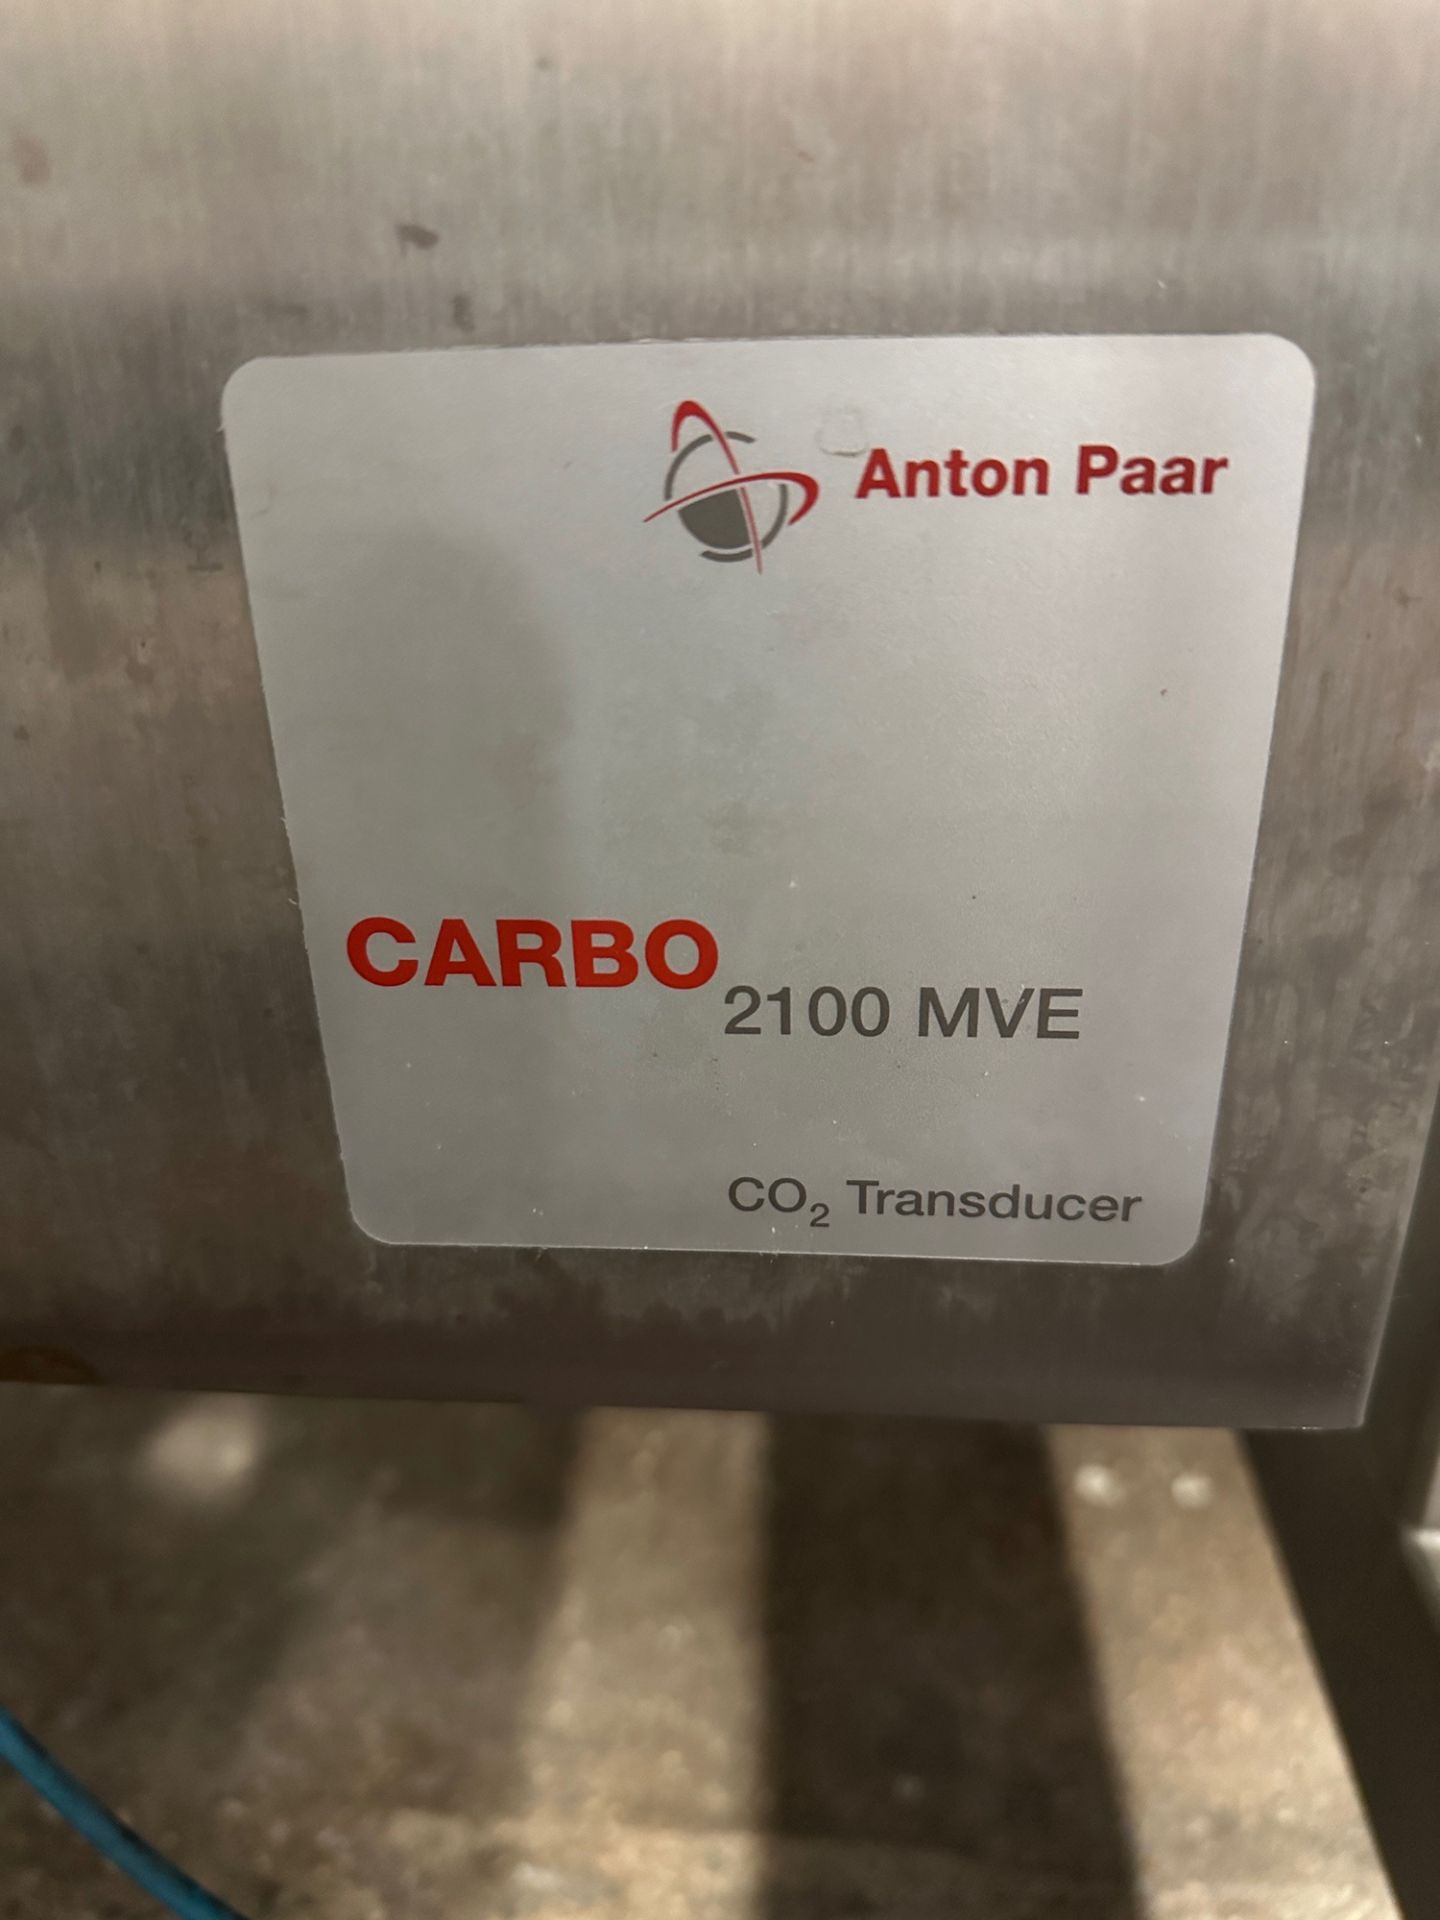 2016 Corosys BCS Blending &amp; Carbonation System, Anton Paar Carbo2100 MVE CO2 Transducer - Image 6 of 6